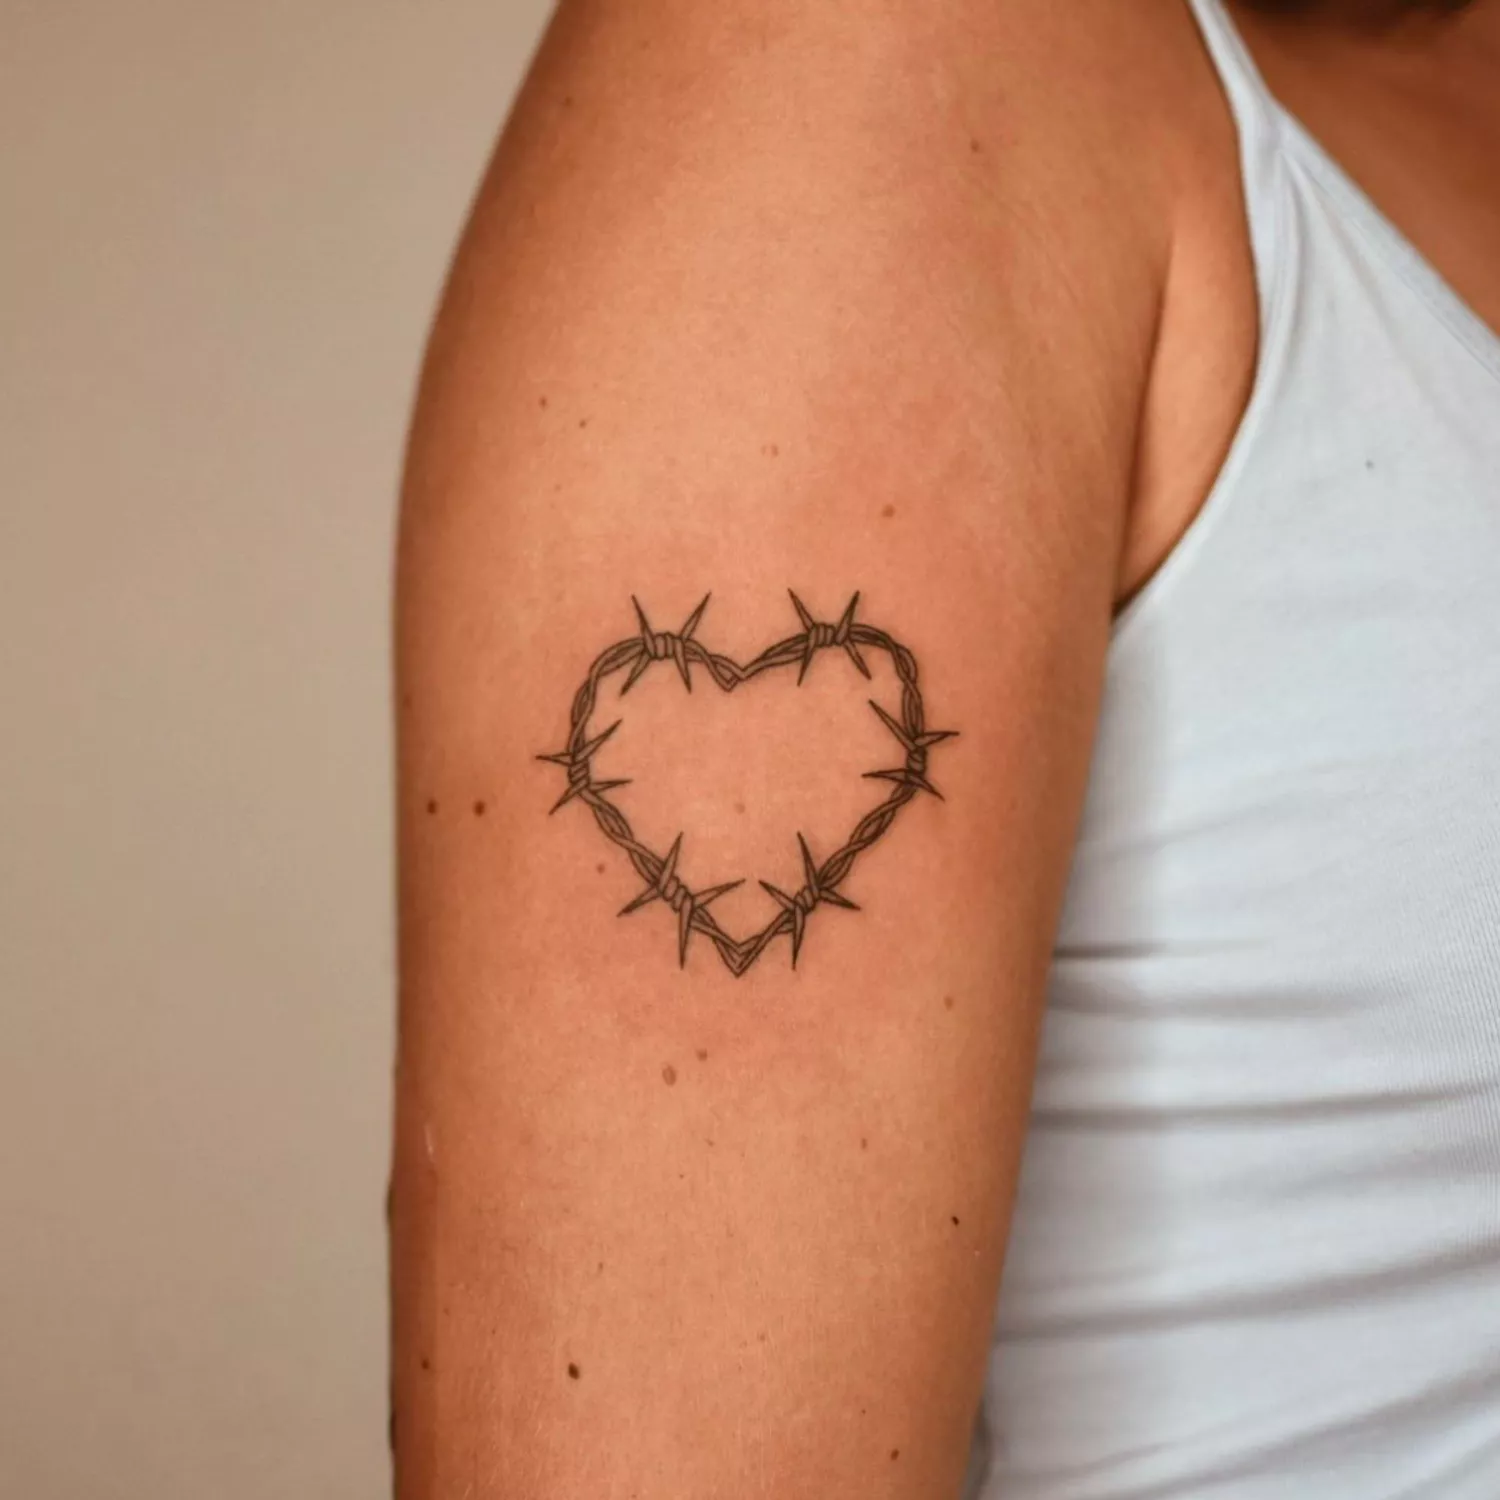 A barbed-wire heart tattoo on the mid-arm.